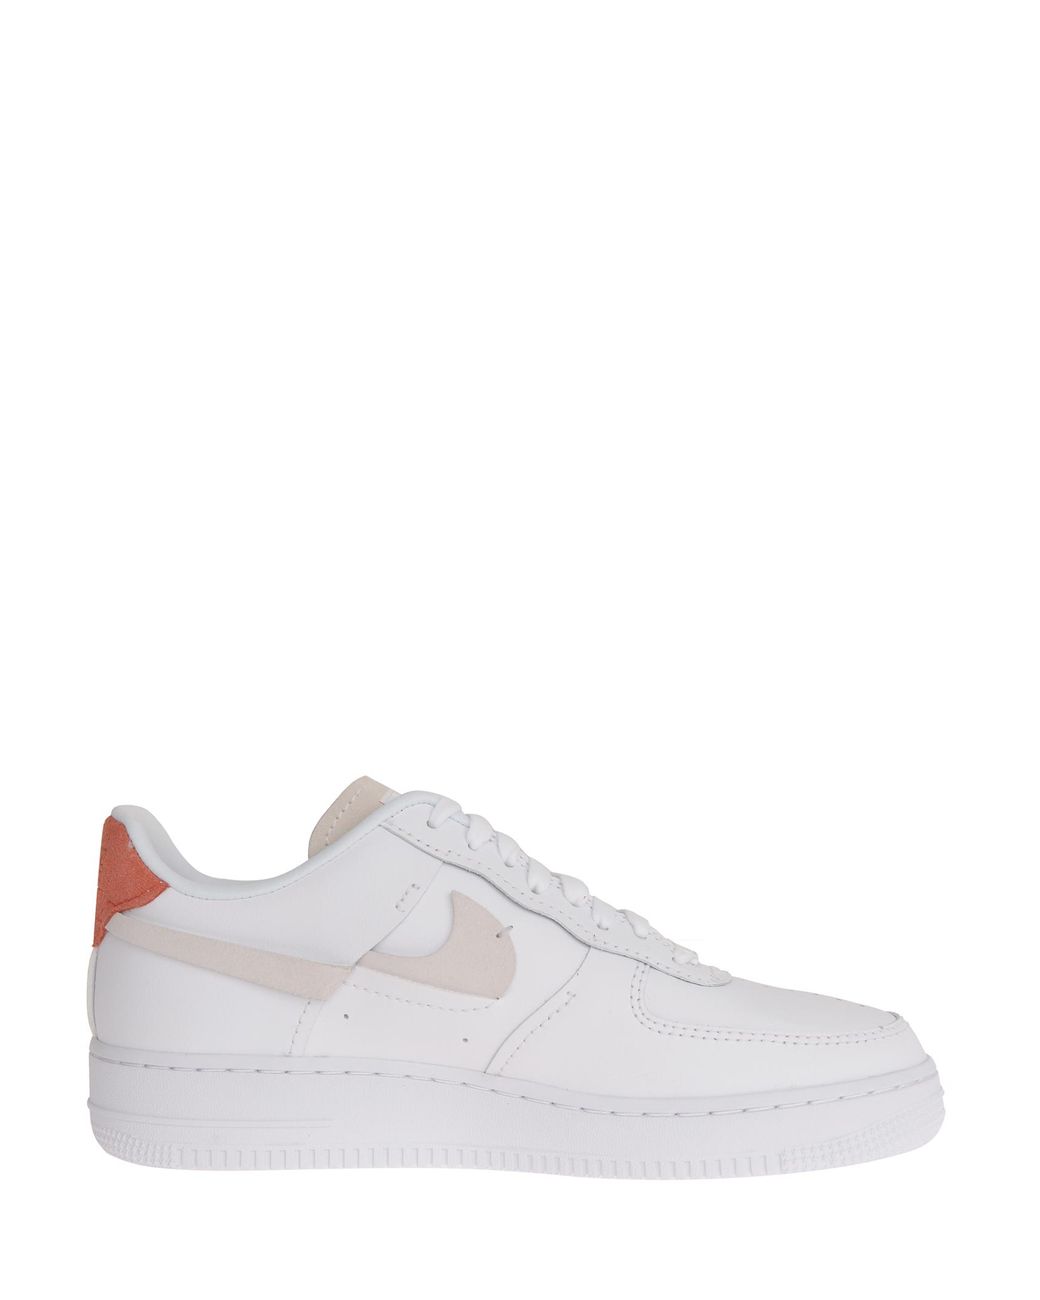 huevo mago Santo Nike White Air Force 1 '07 Leather Sneakers With Orange Back On One Shoe  And Blue On The Other. | Lyst